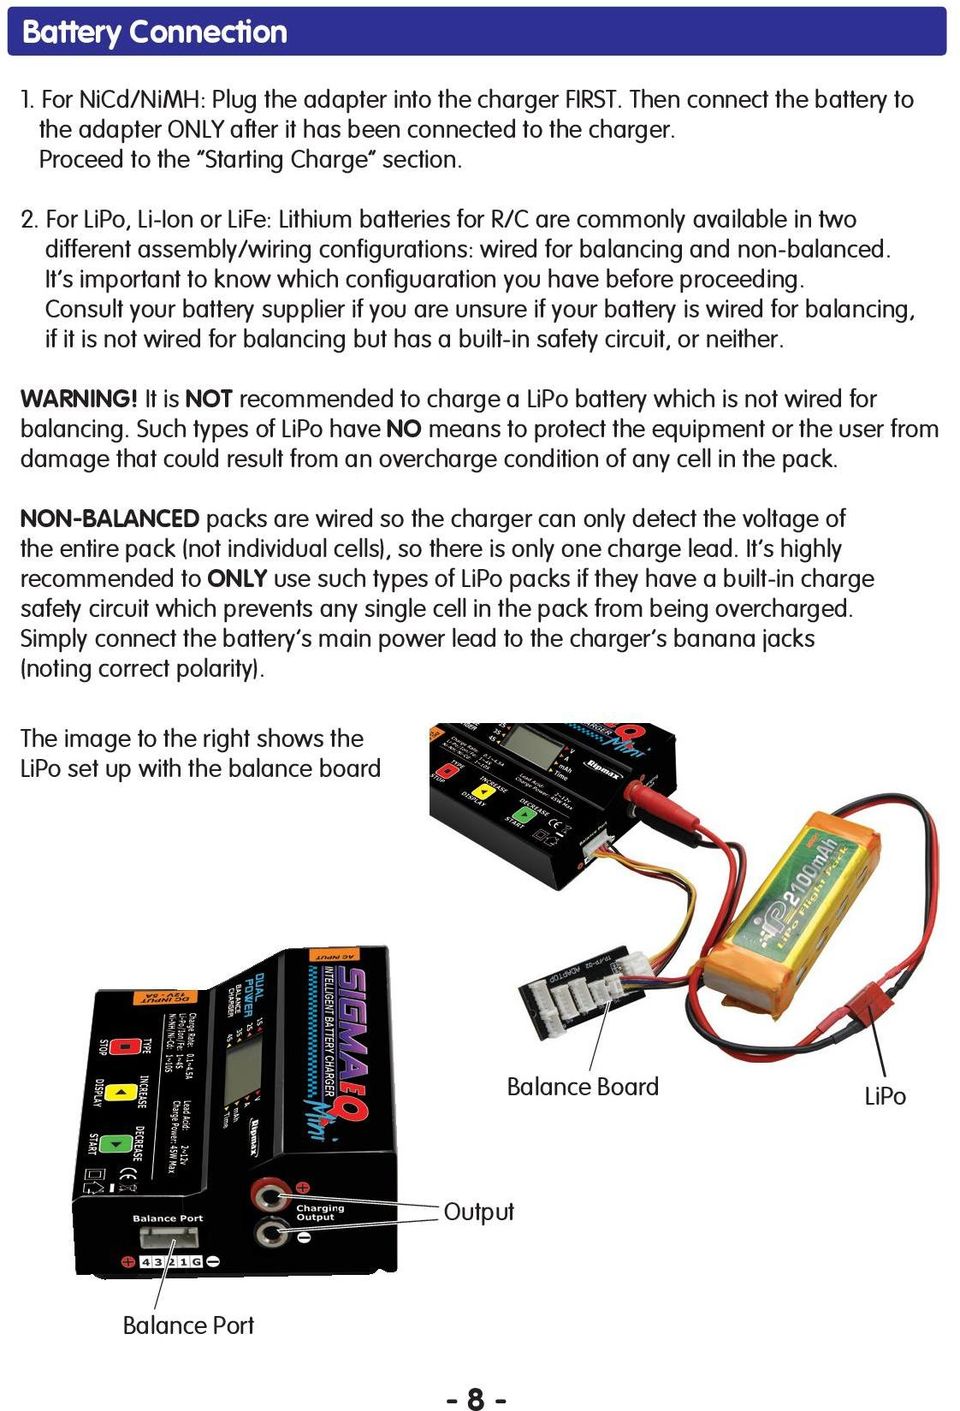 For LiPo, Li-Ion or LiFe: Lithium batteries for R/C are commonly available in two different assembly/wiring configurations: wired for balancing and non-balanced.